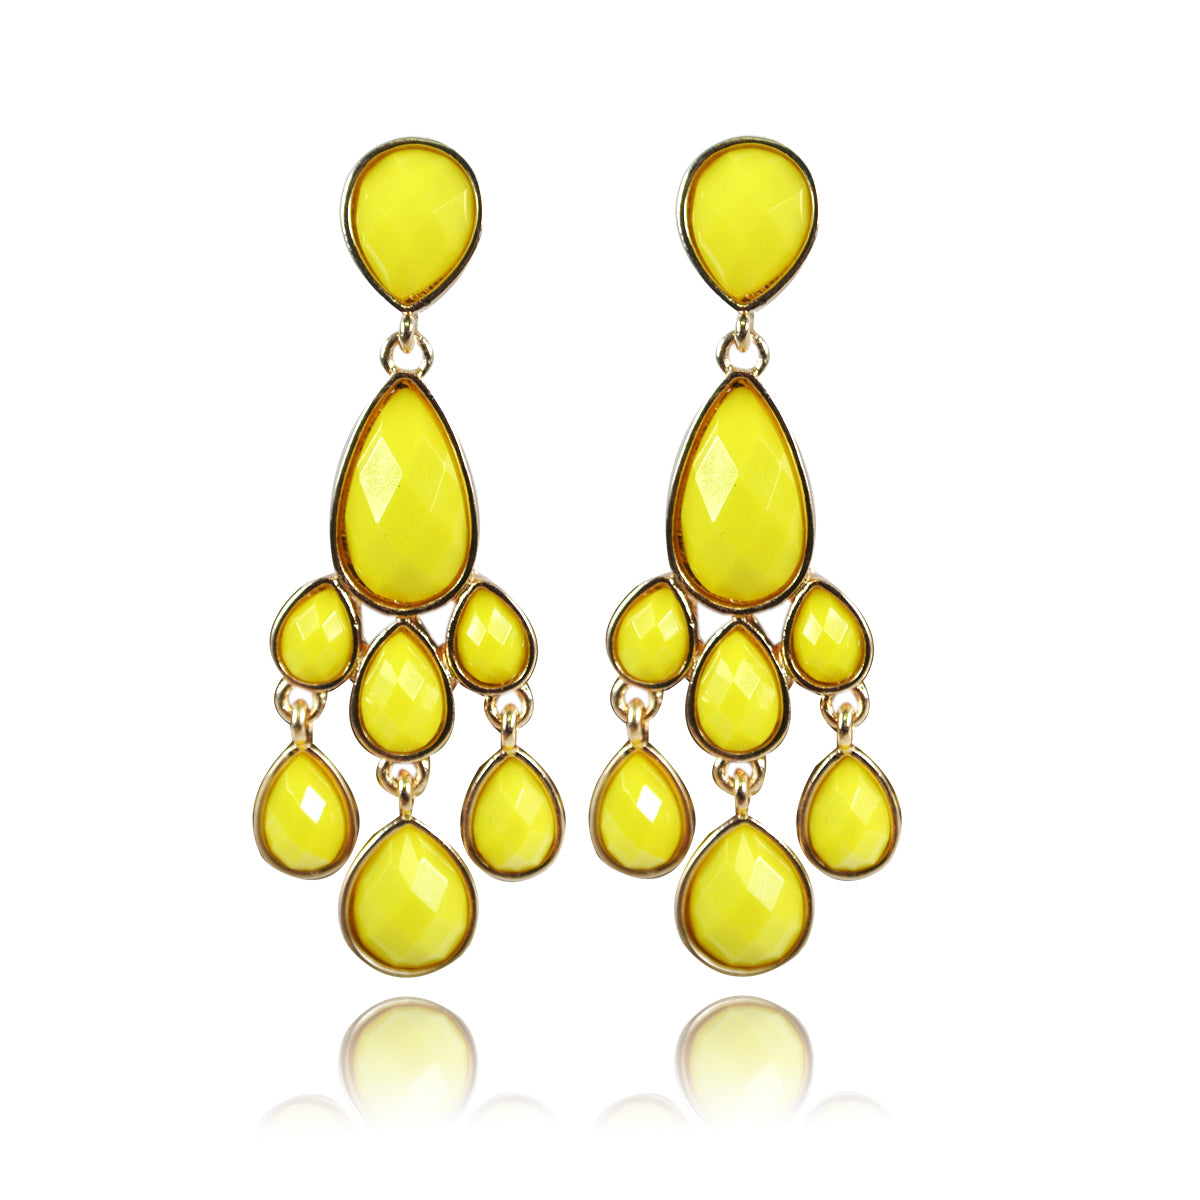 Wrapables Vintage Faceted Resin Chandelier Statement Earrings